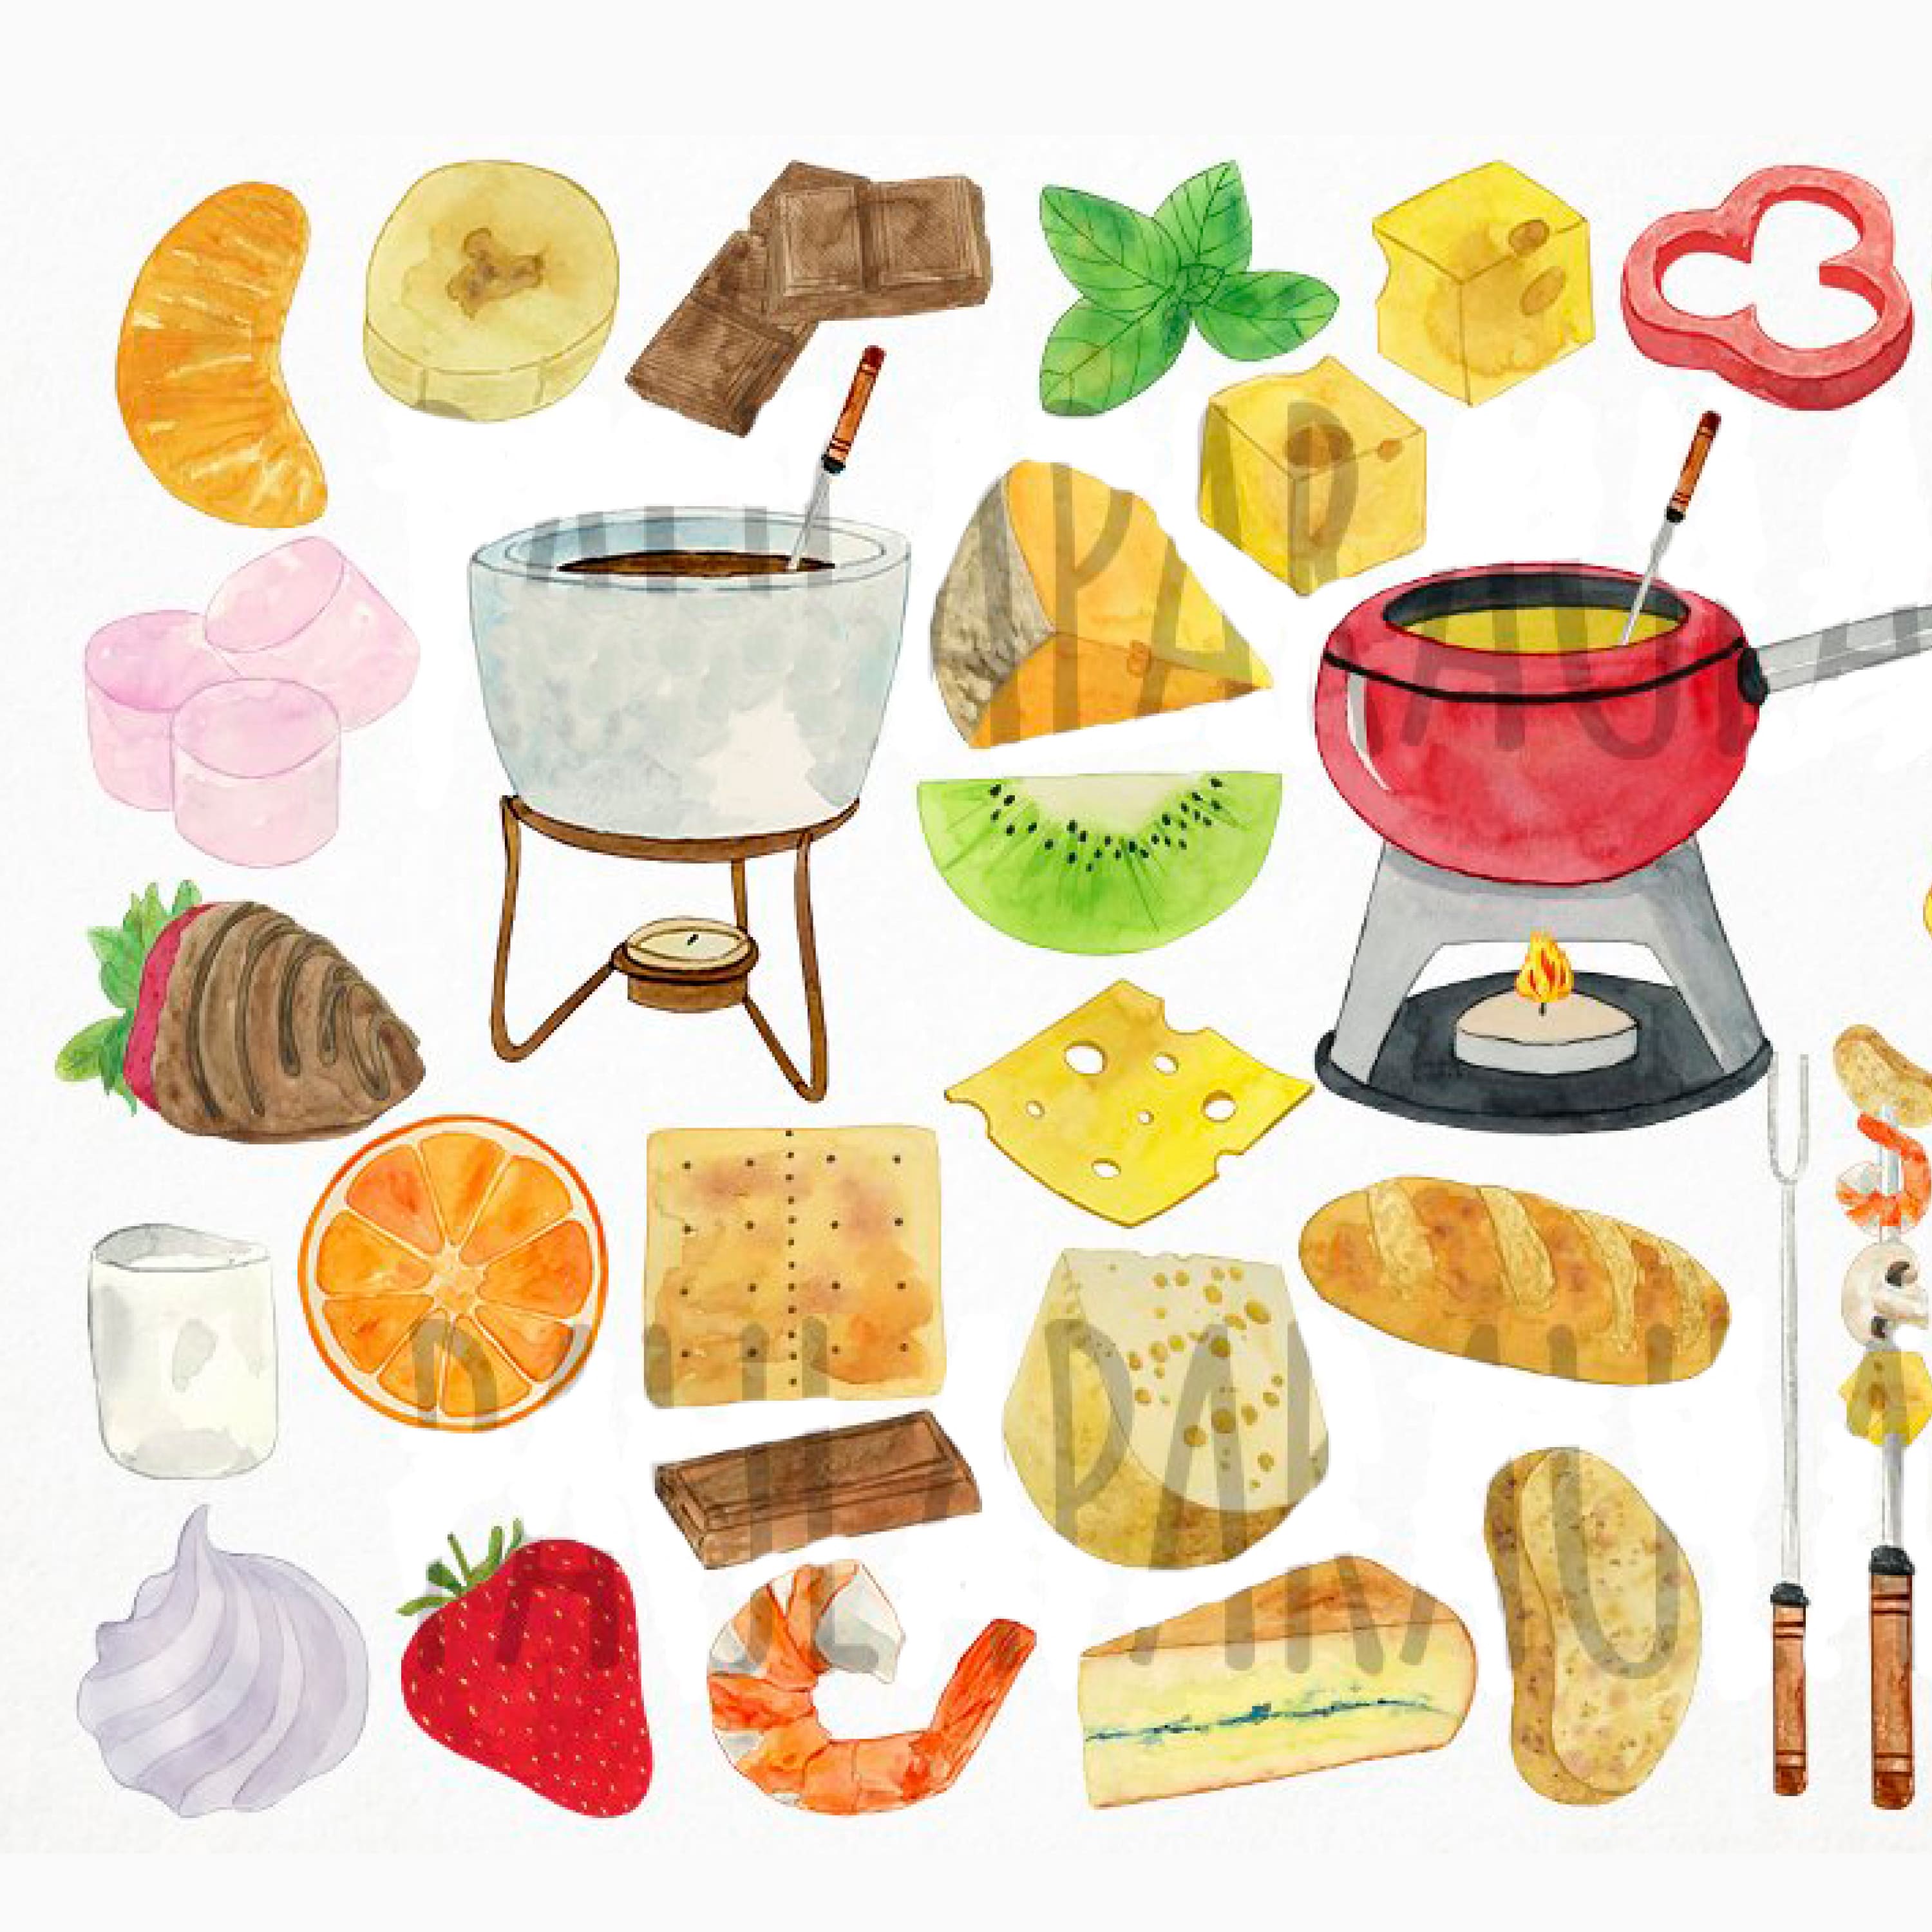 A set of great images of hard cheese and snacks for fondue.